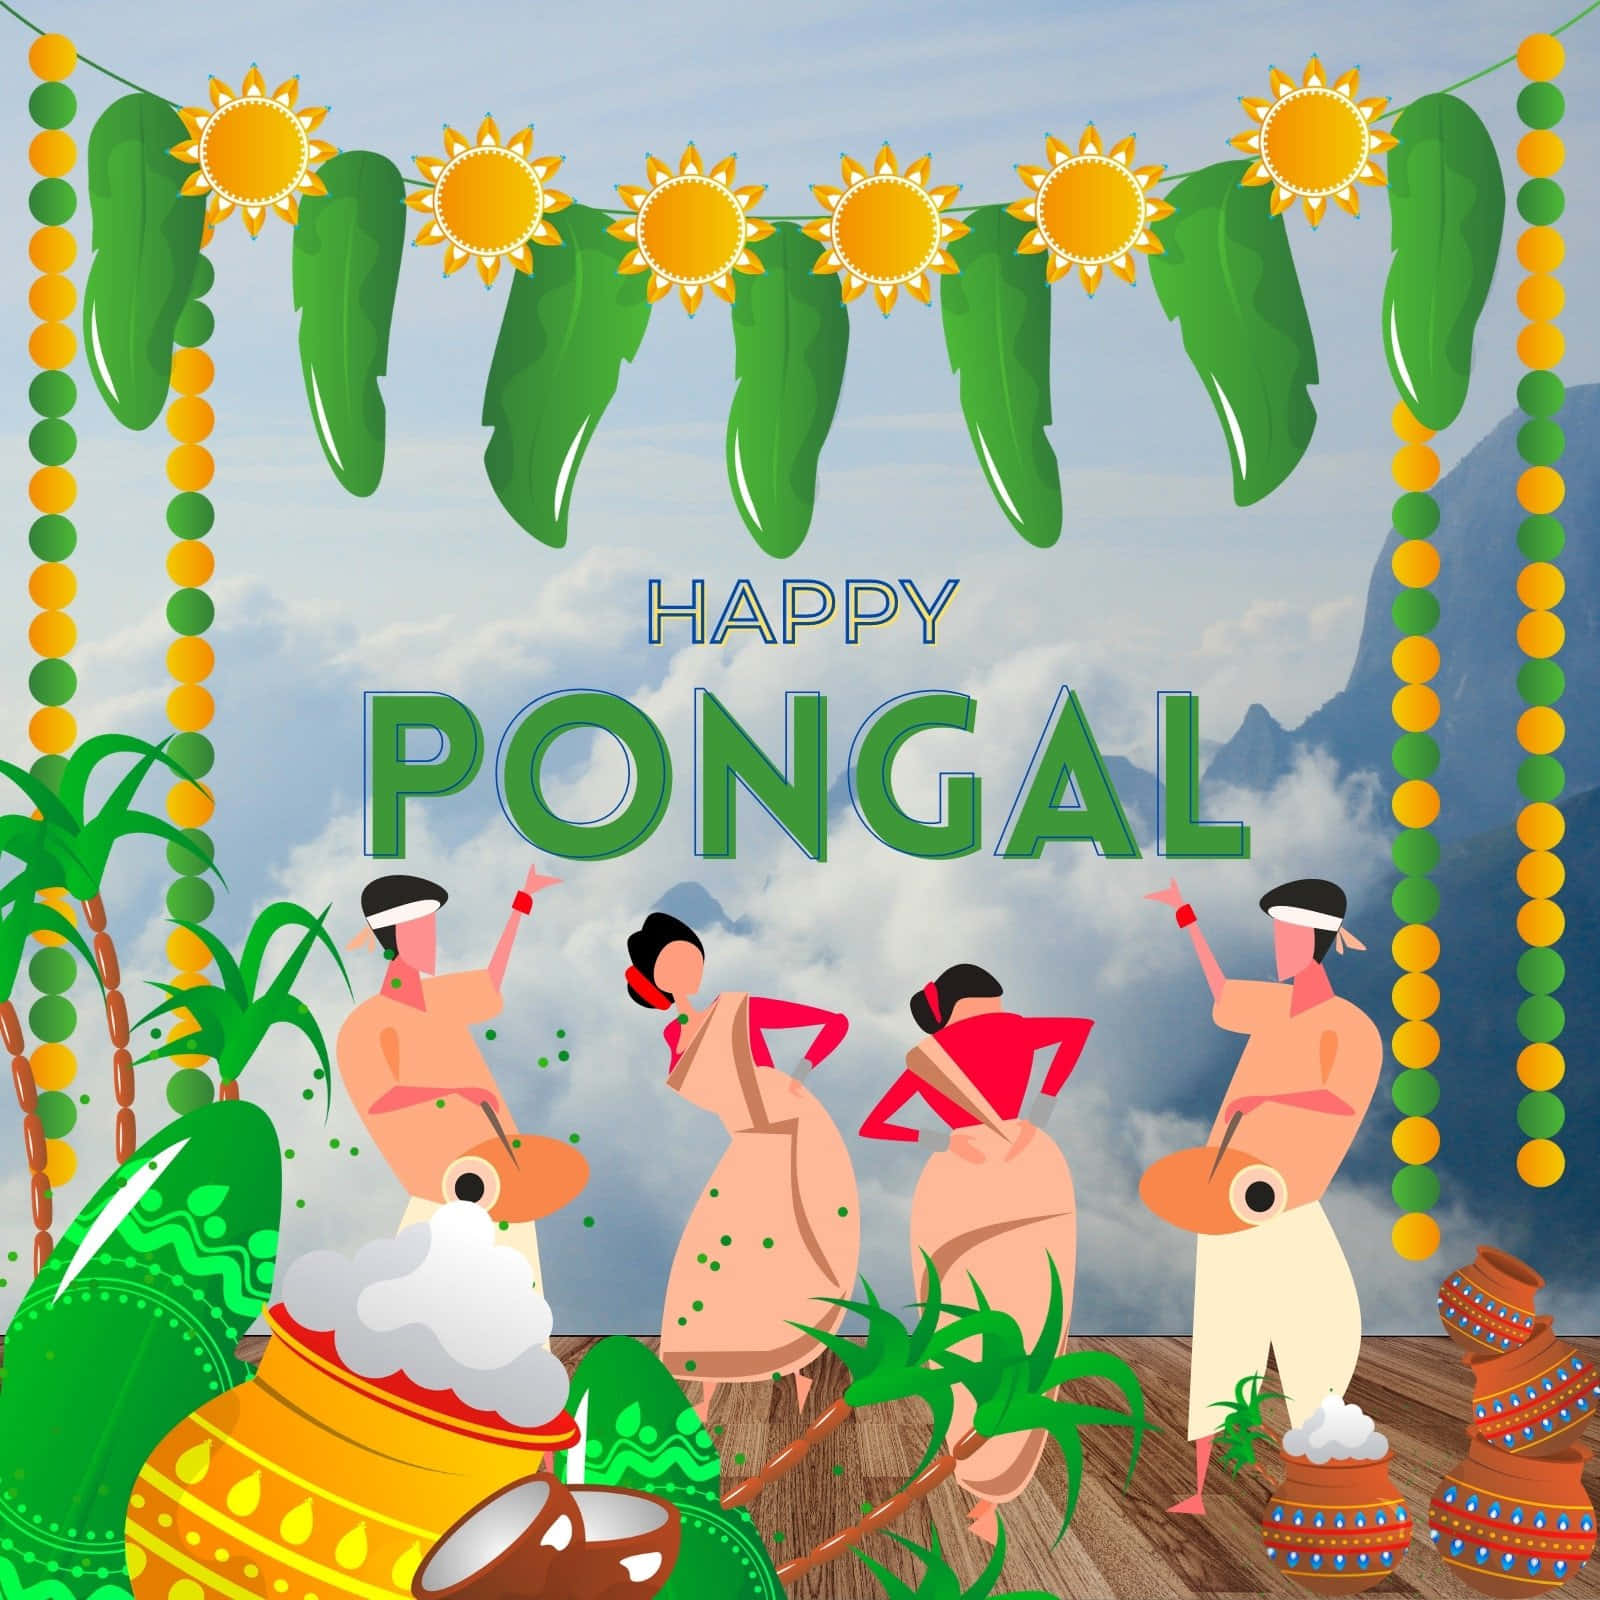 Celebrate auspicious Pongal with friends and family